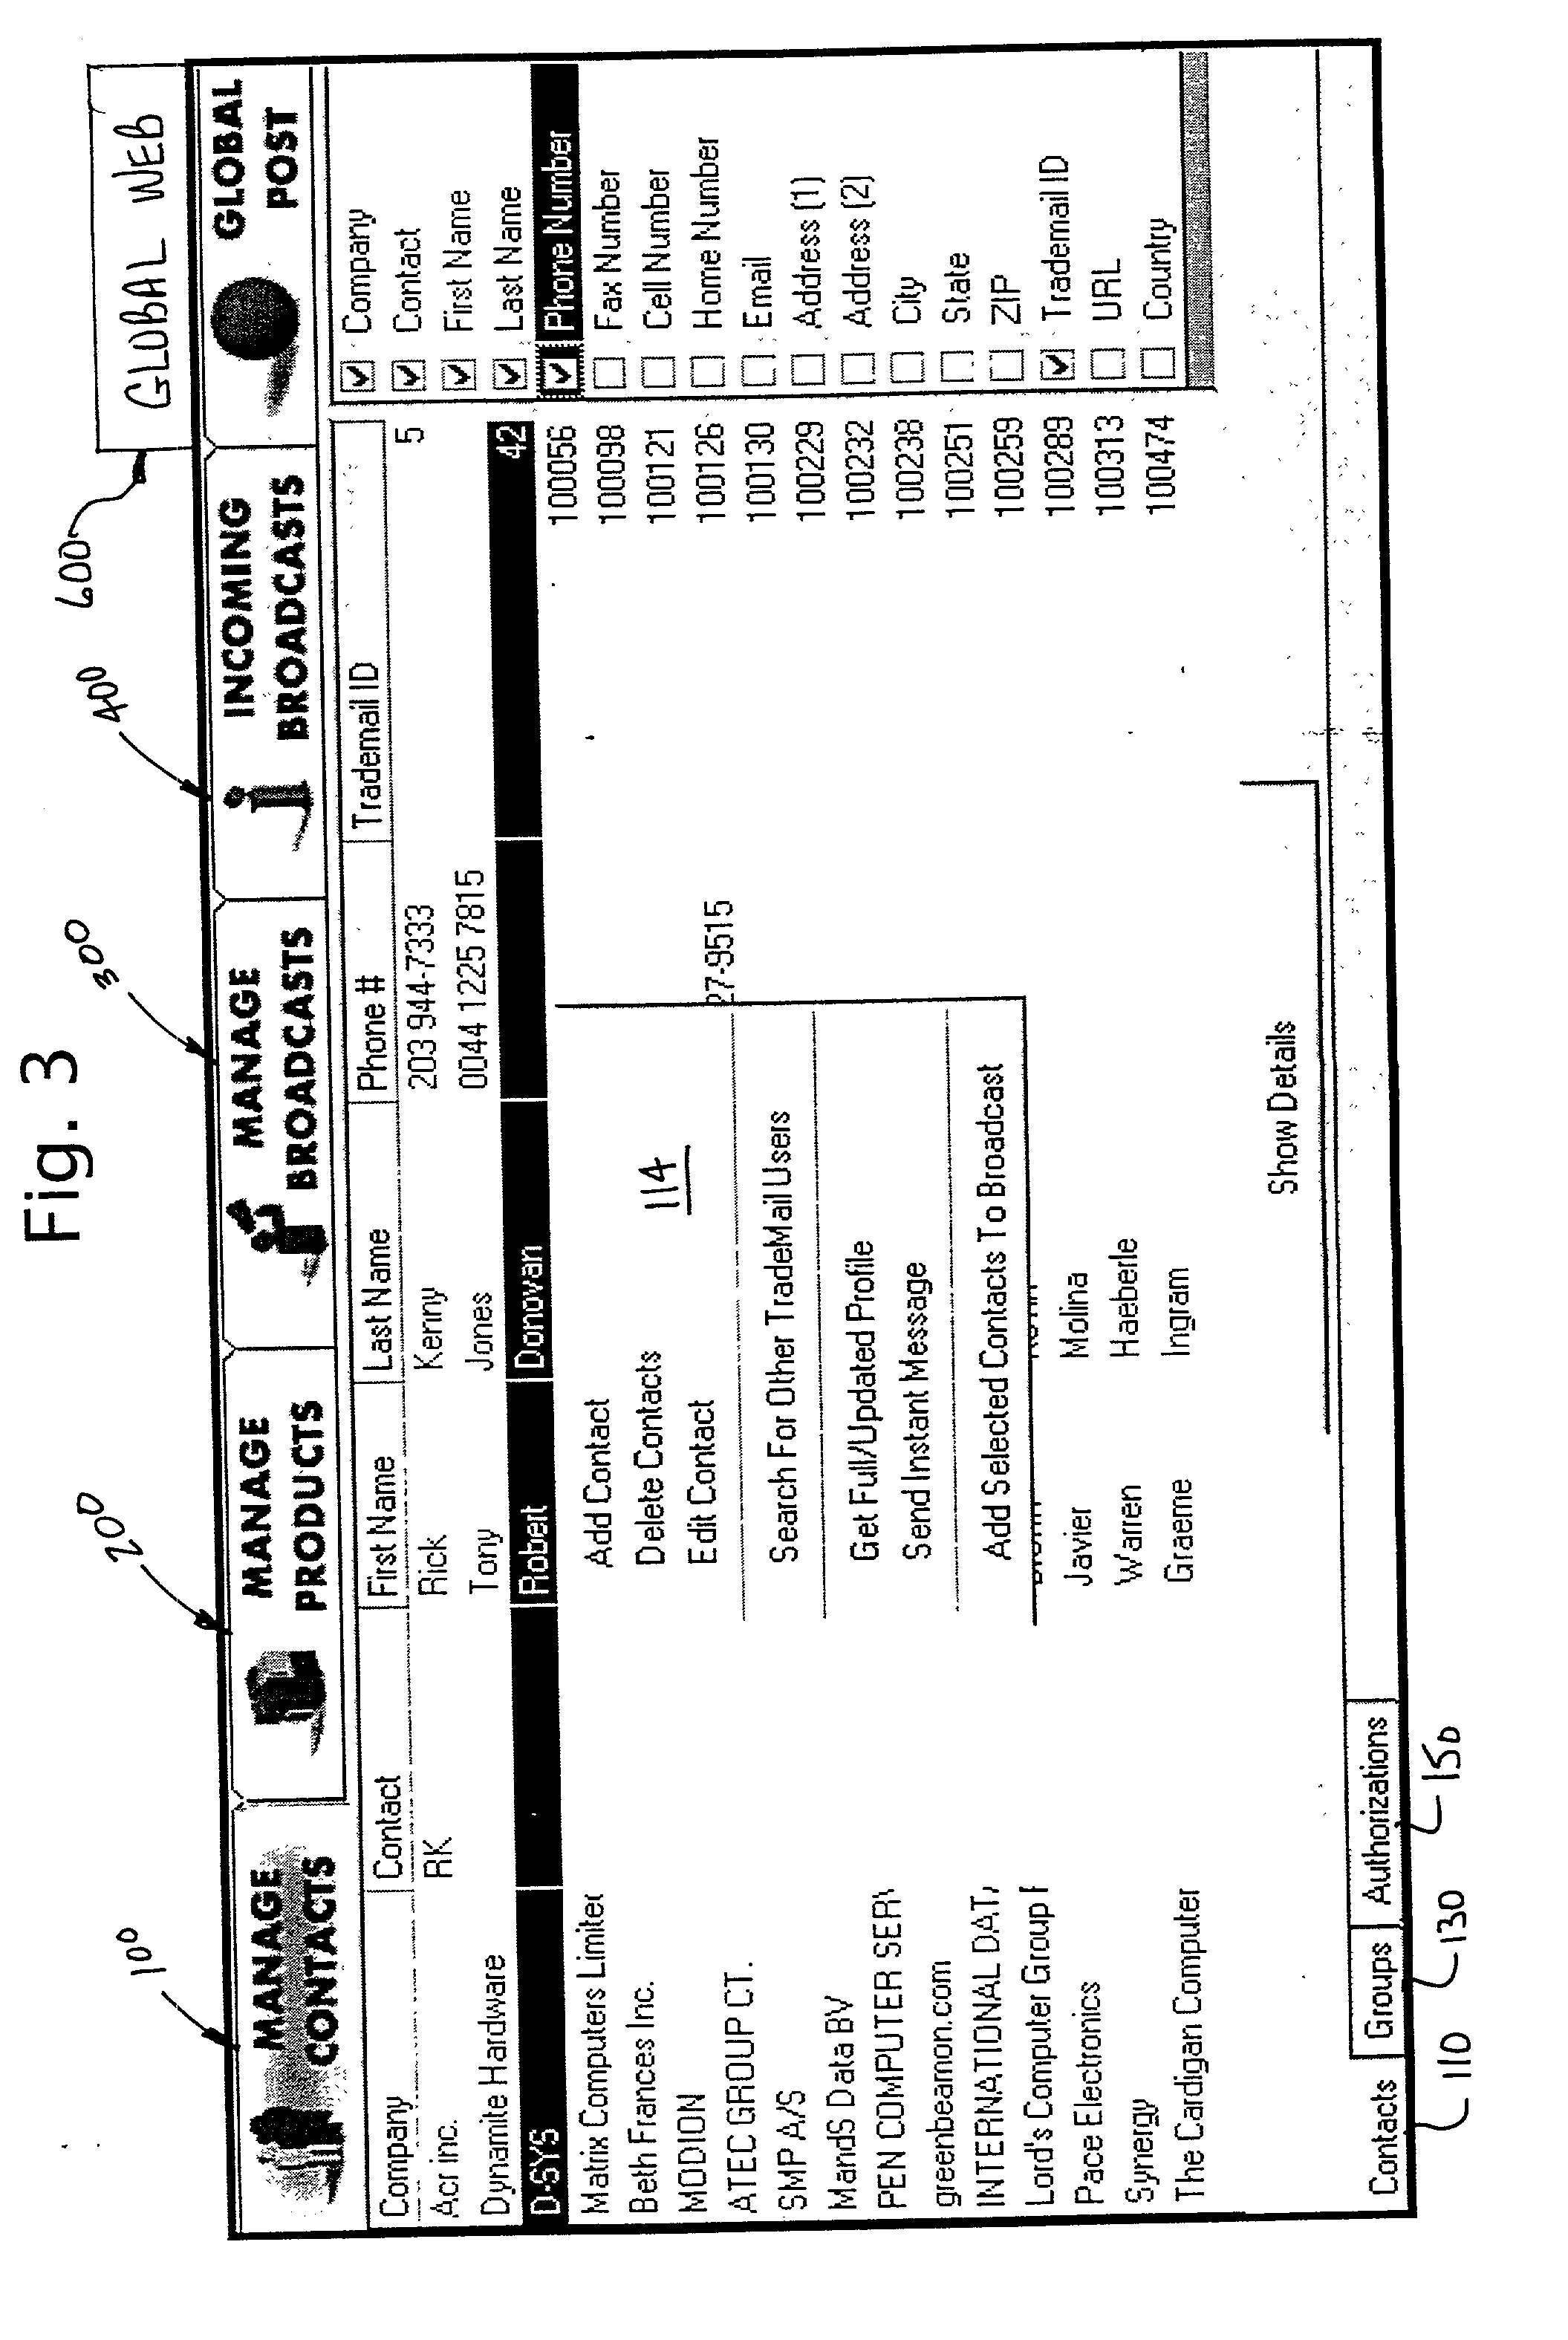 System and method for conducting business-to-business communications